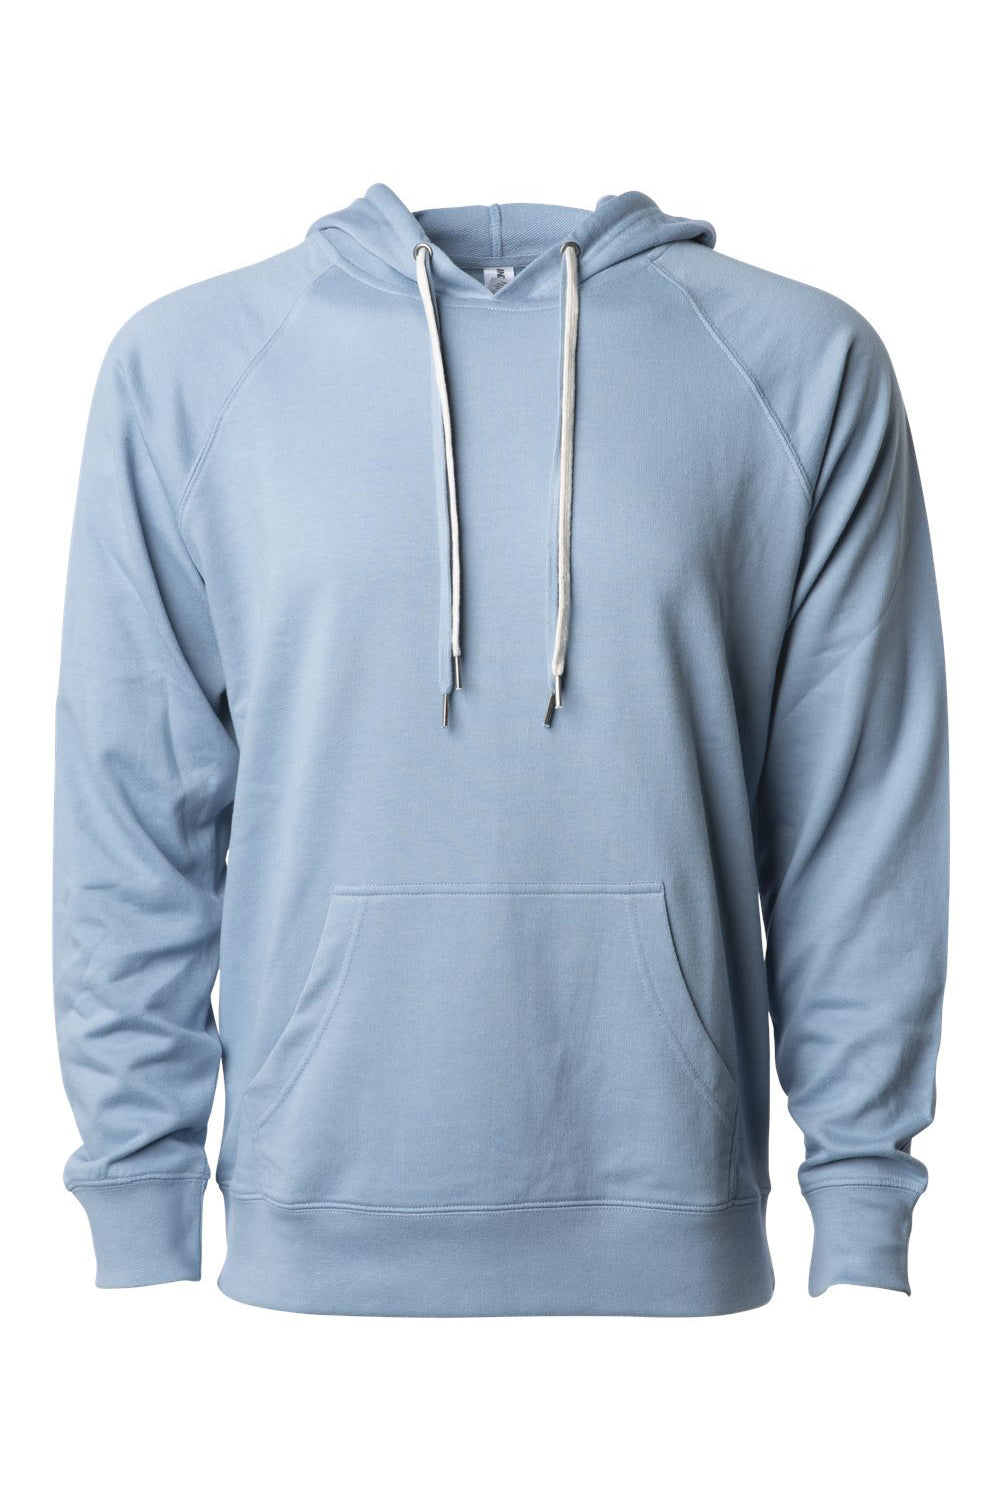 Independent Trading Co. SS1000 Mens Icon Loopback Terry Hooded Sweatshirt Hoodie Misty Blue Flat Front